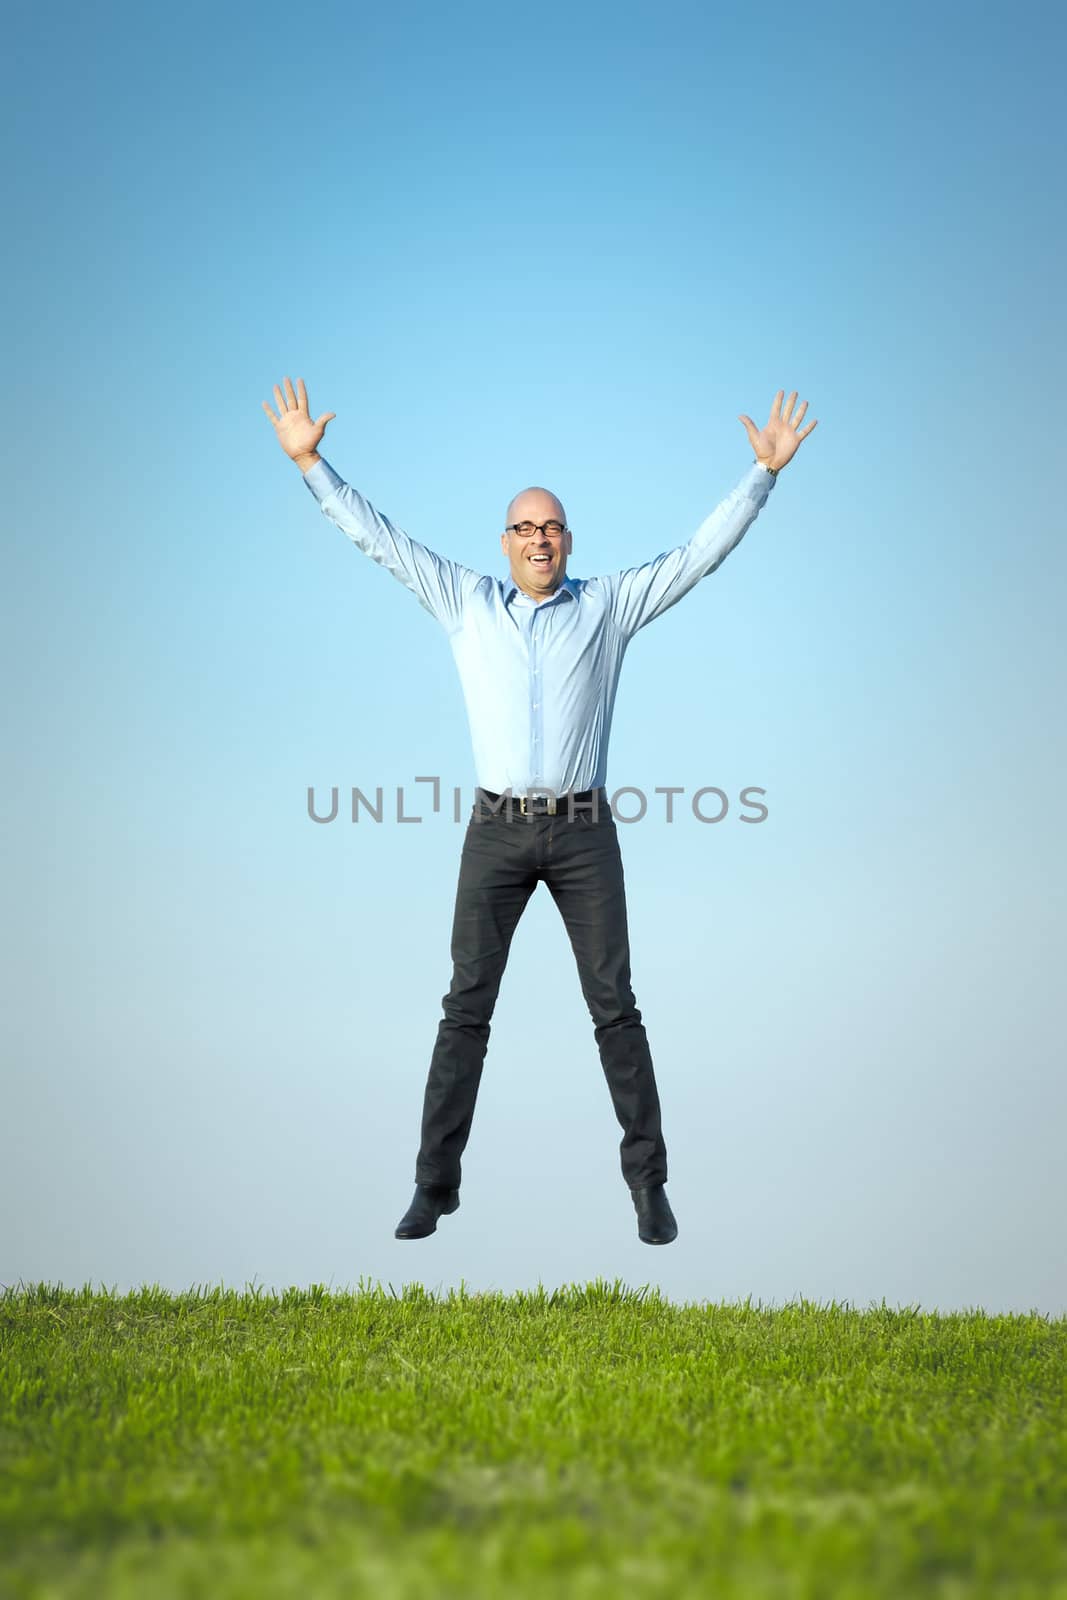 An image of a happy jumping man